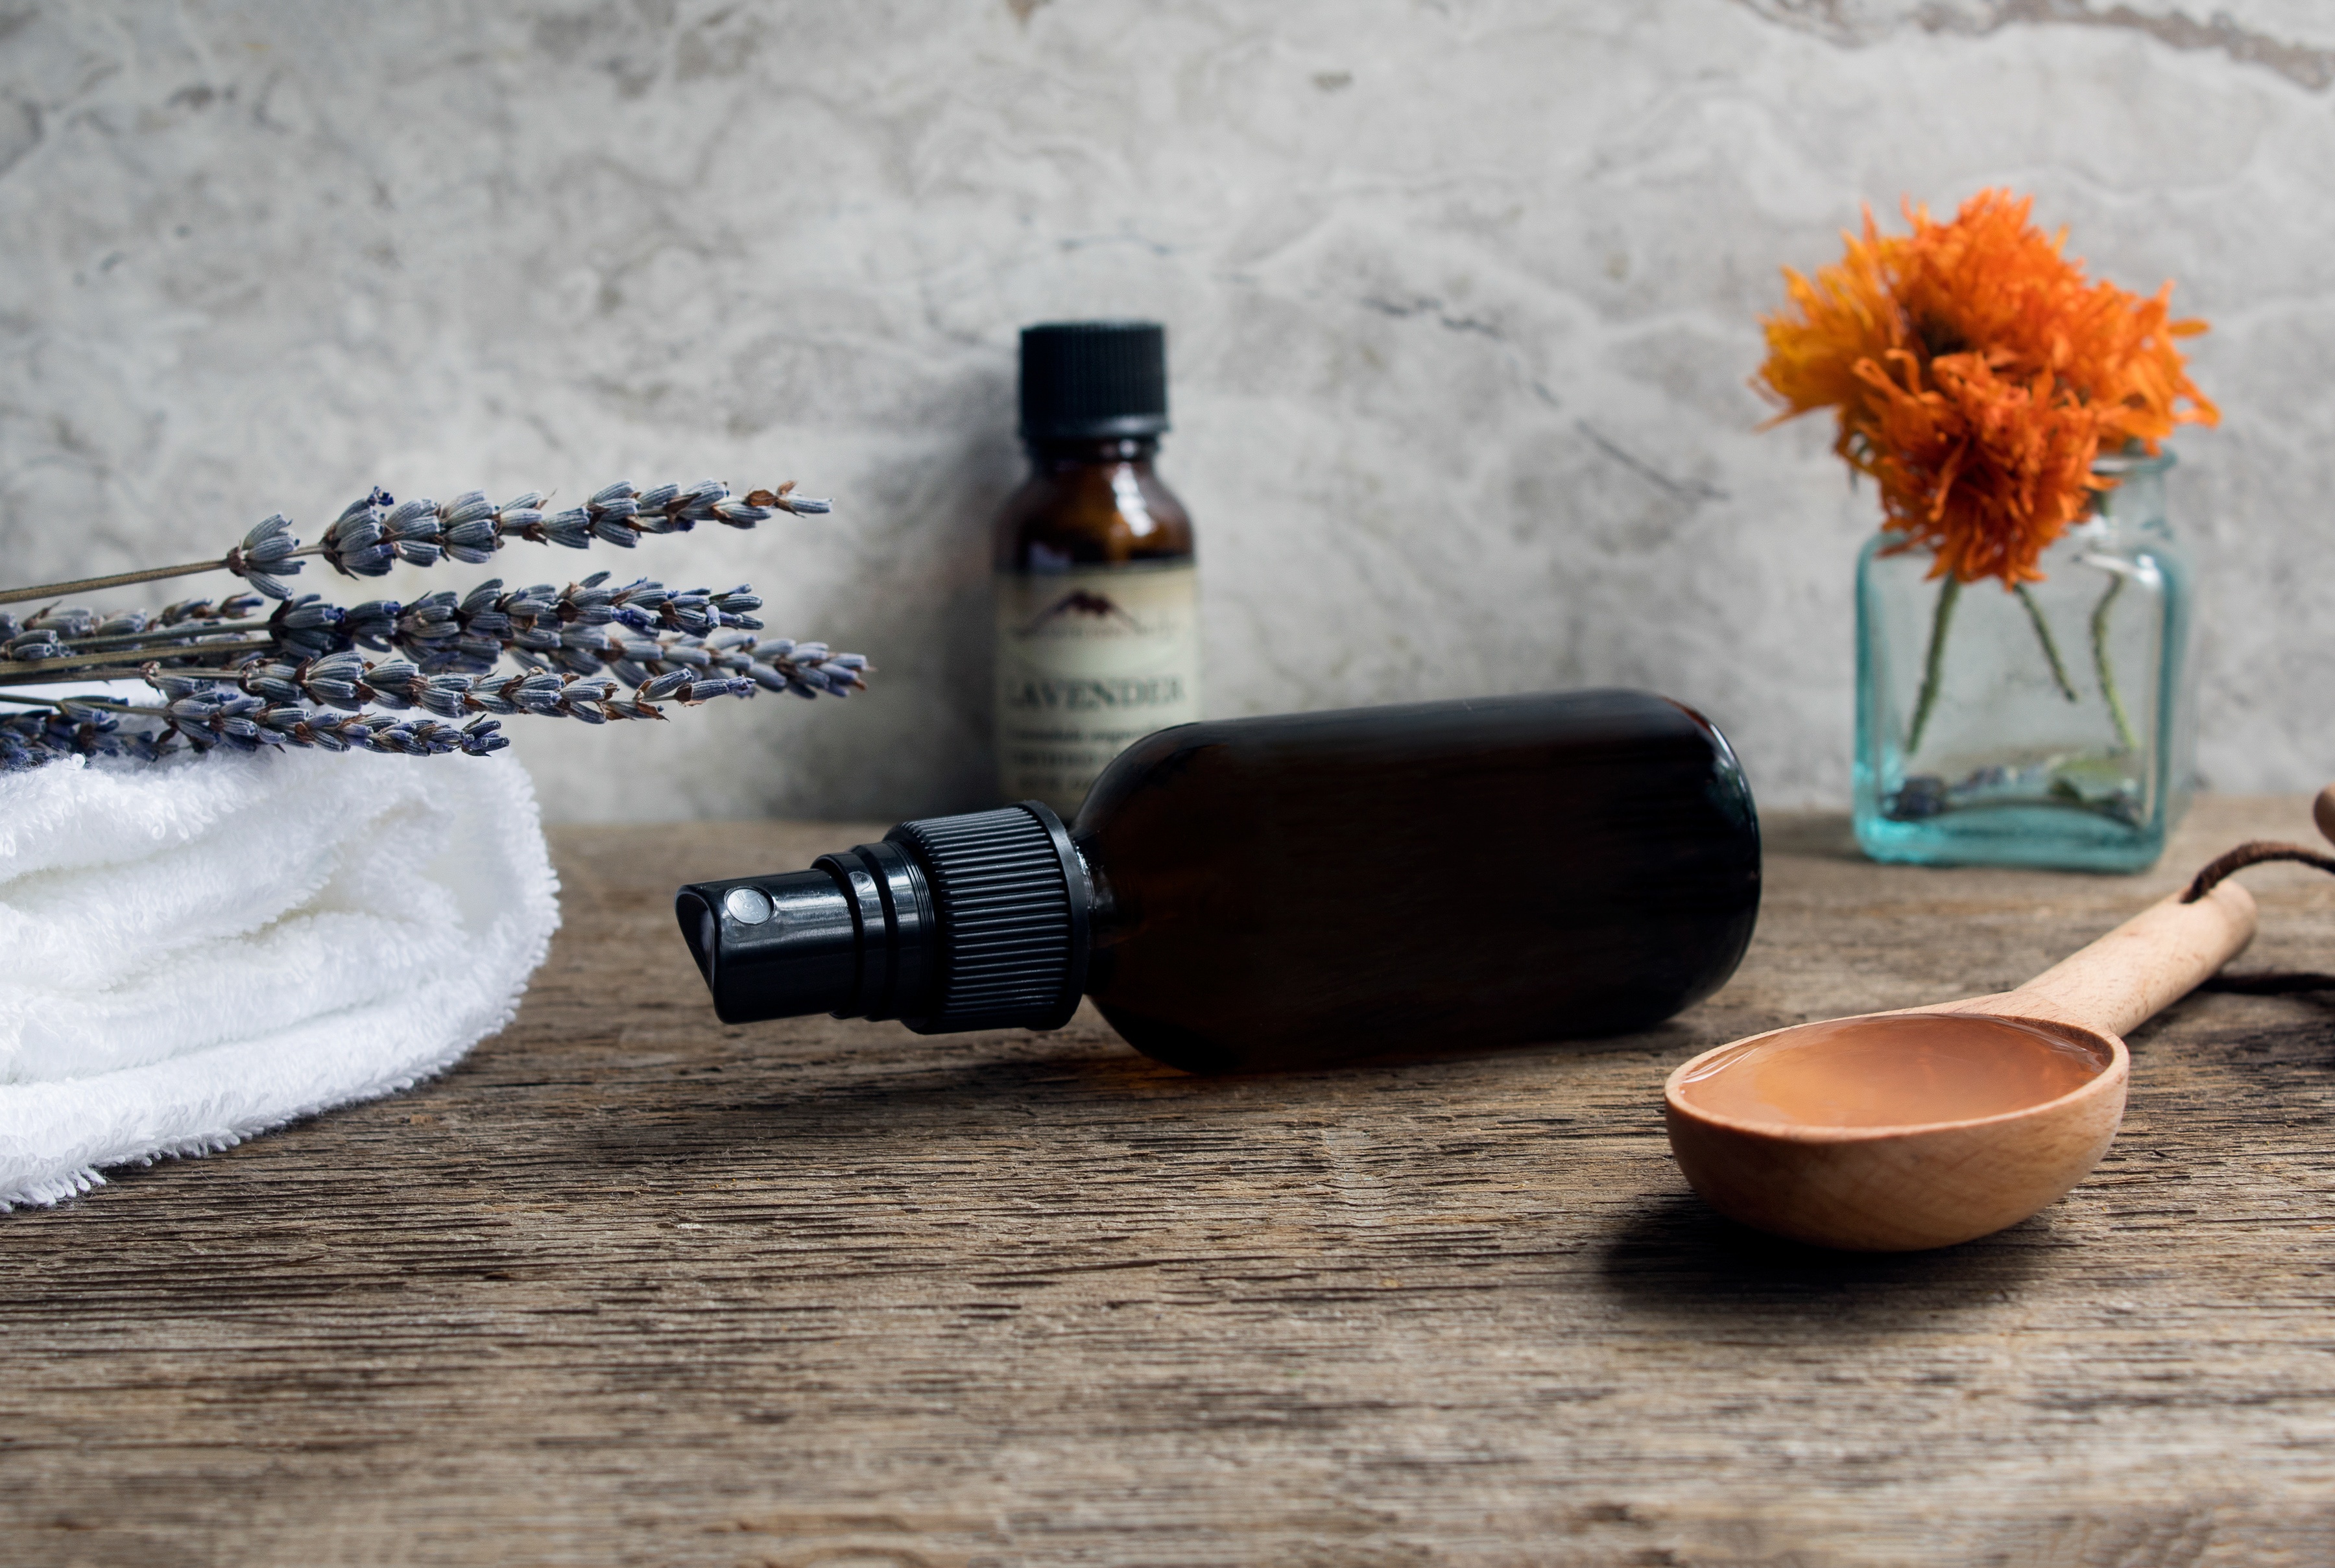 Small mister bottle laying on side on wooden surface next to wooden spoon and lavender